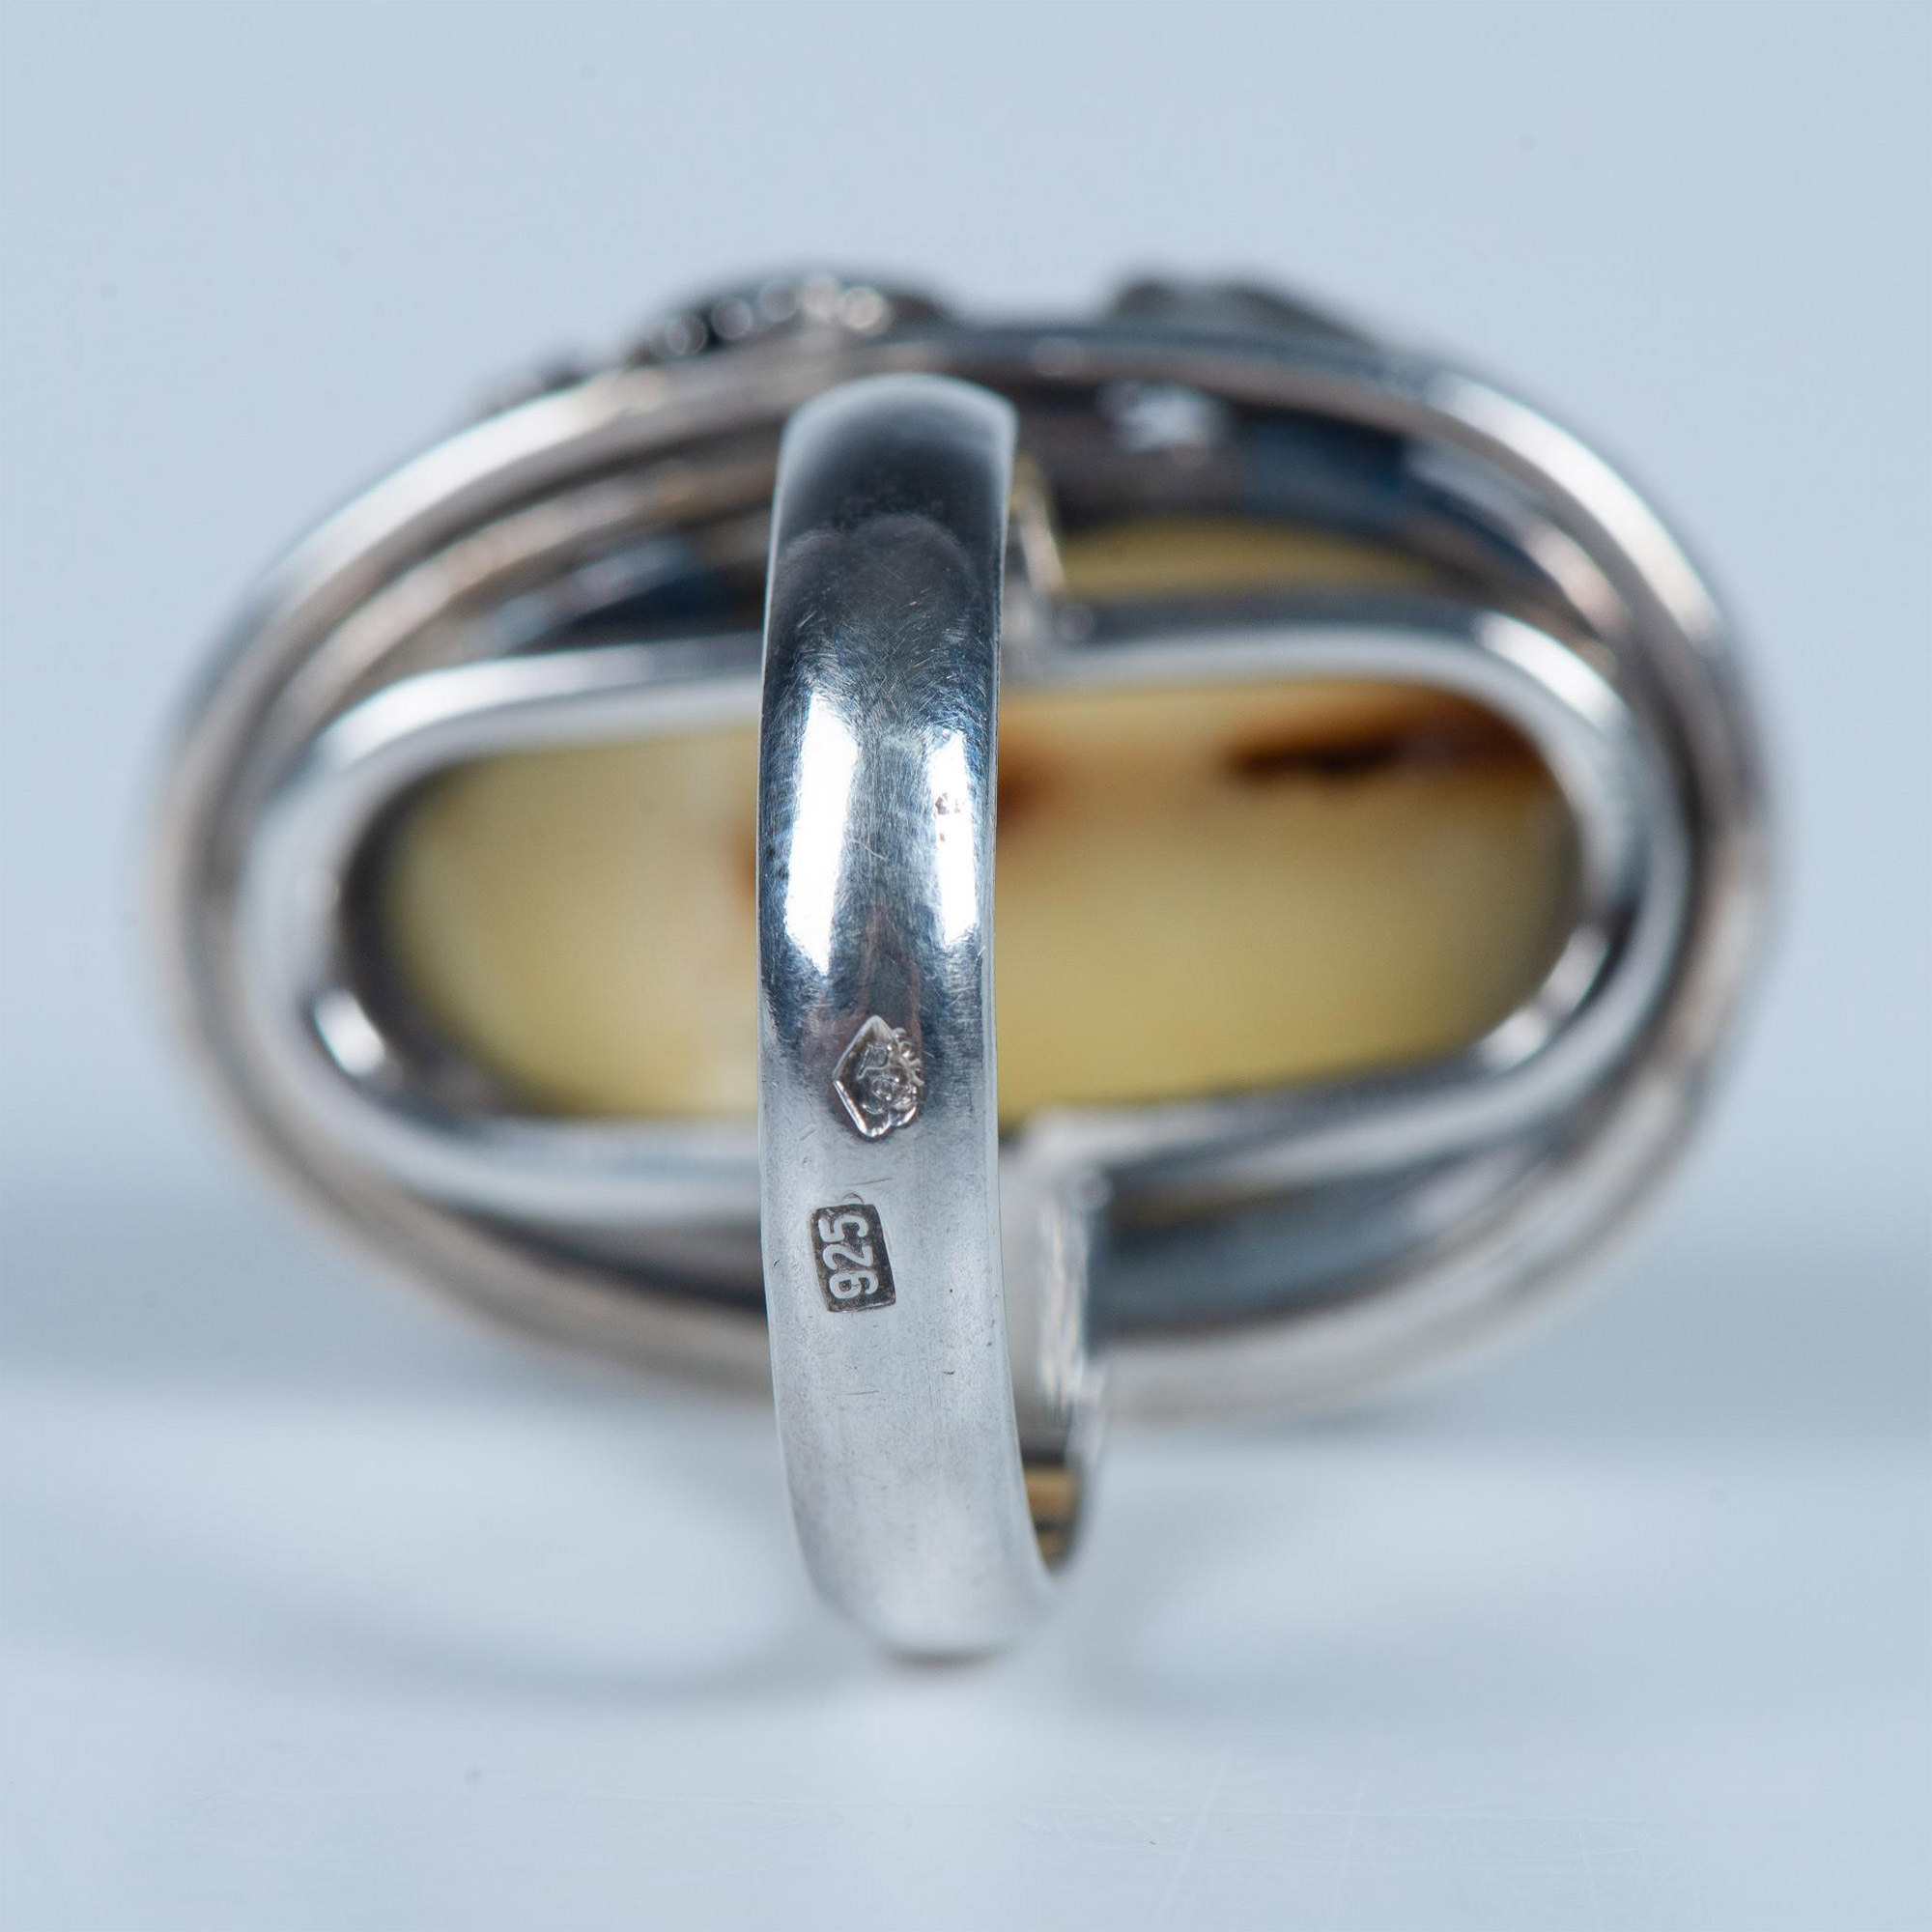 Stunning Butterscotch Baltic Amber and Sterling Silver Ring - Image 6 of 7